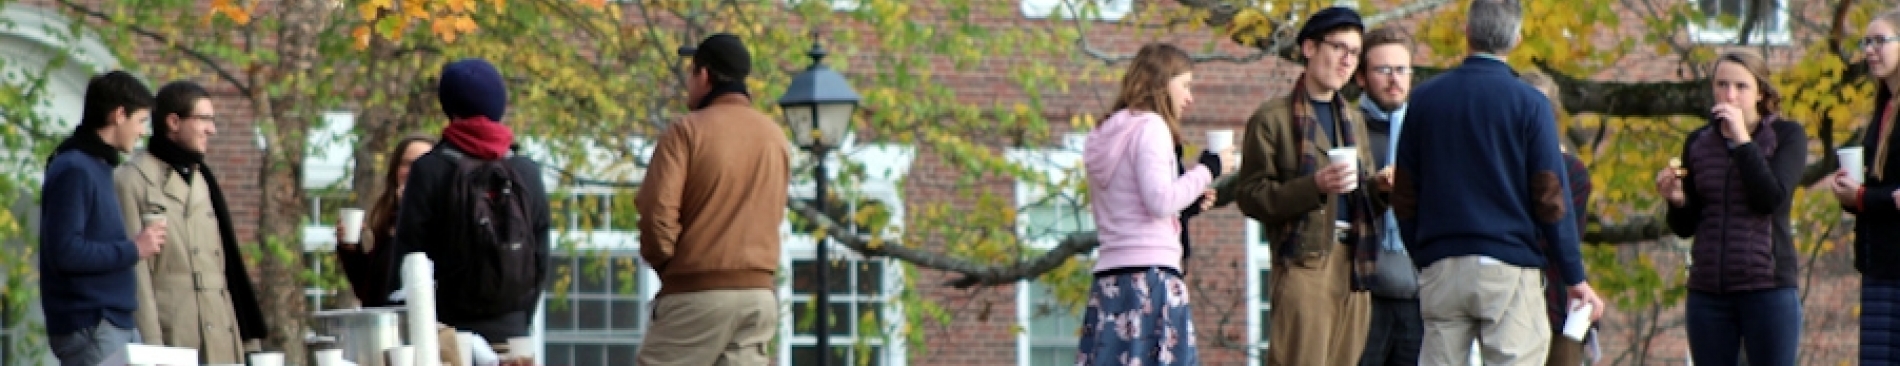 Students Celebrate Fall in New England with Scarves